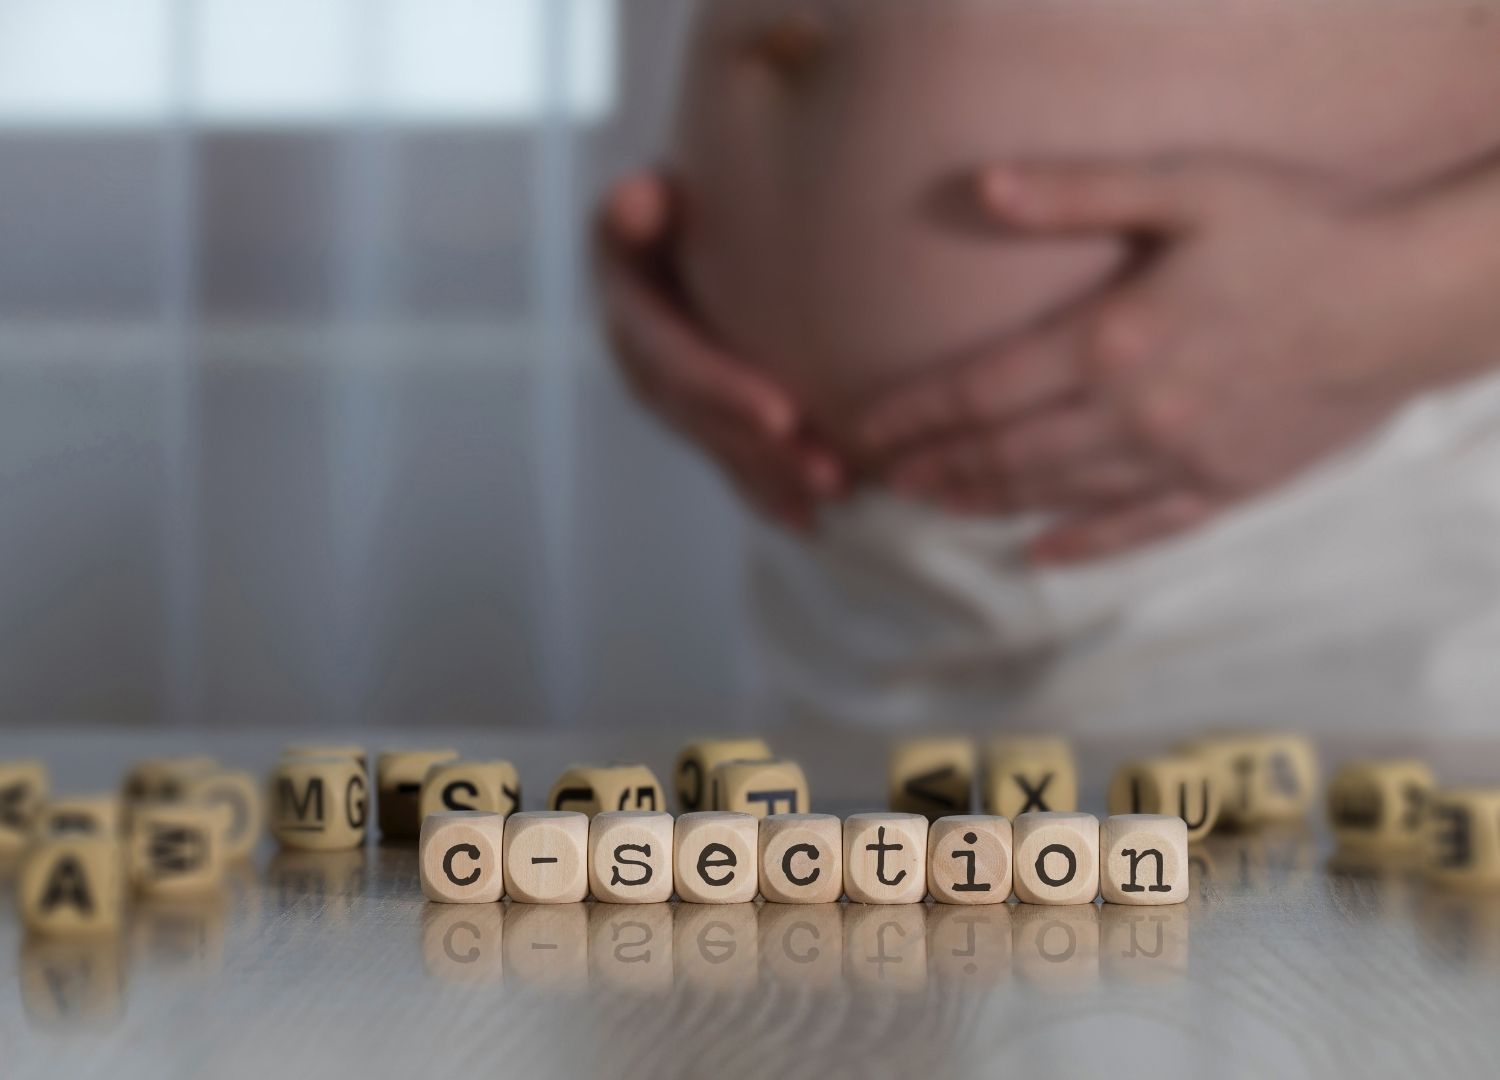 Cesarean Section: Why Must I Have It?